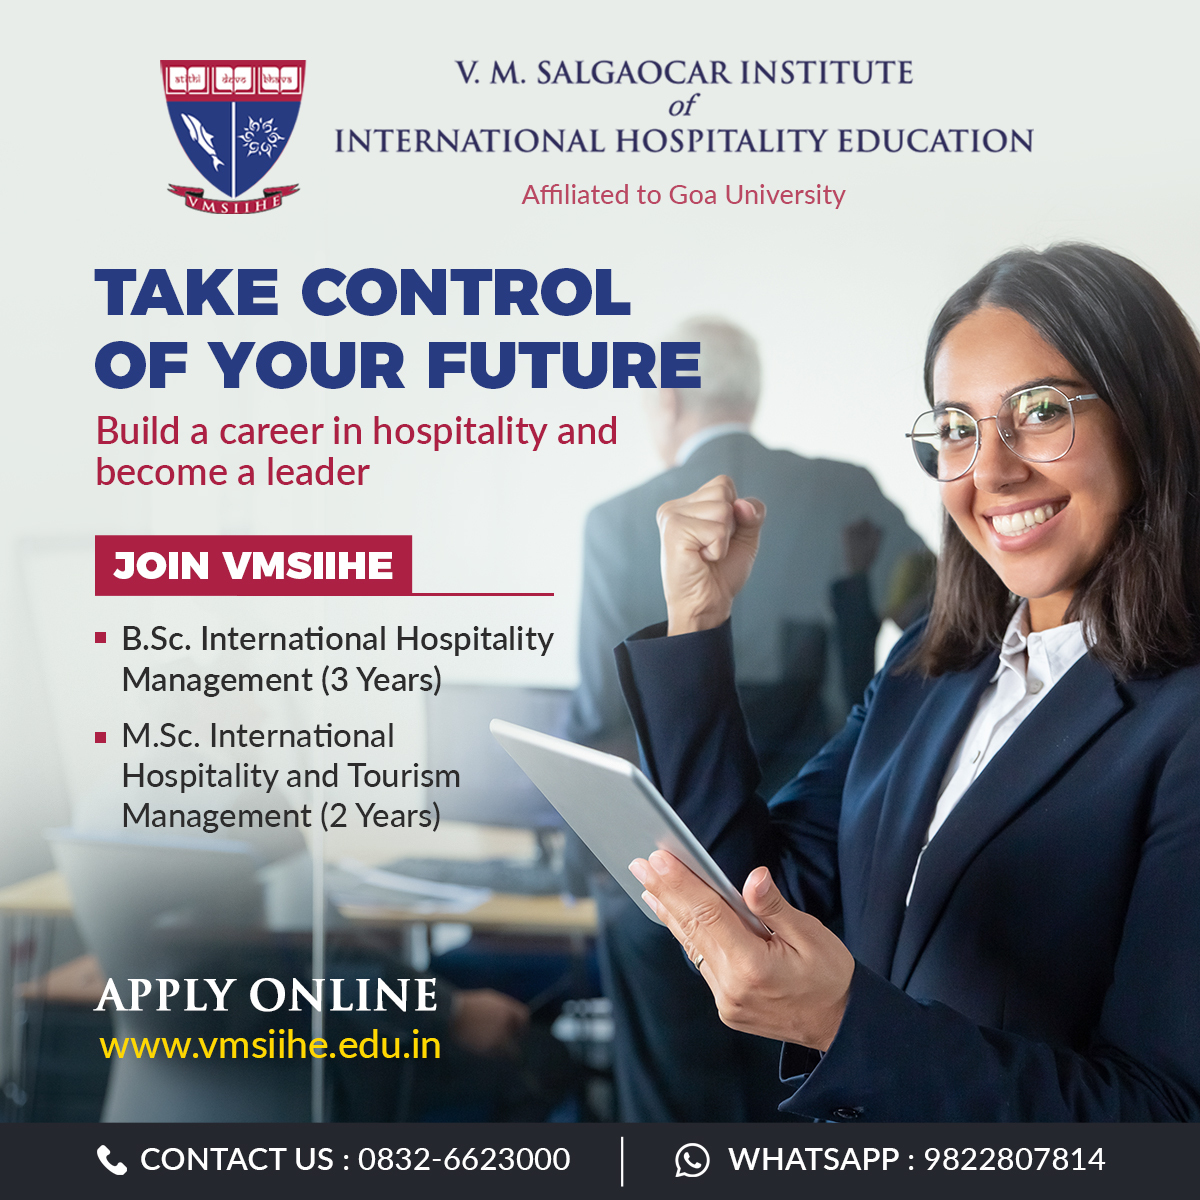 At VMSIIHE, we create world class leaders committed to excellence with knowledge, skills and  professional attitude, which are the pre-requisites of the industry.

#admissions #admissionsconsulting #admissionsopen2021 #hospitalityeducation #internationalstudies #21centuryskills